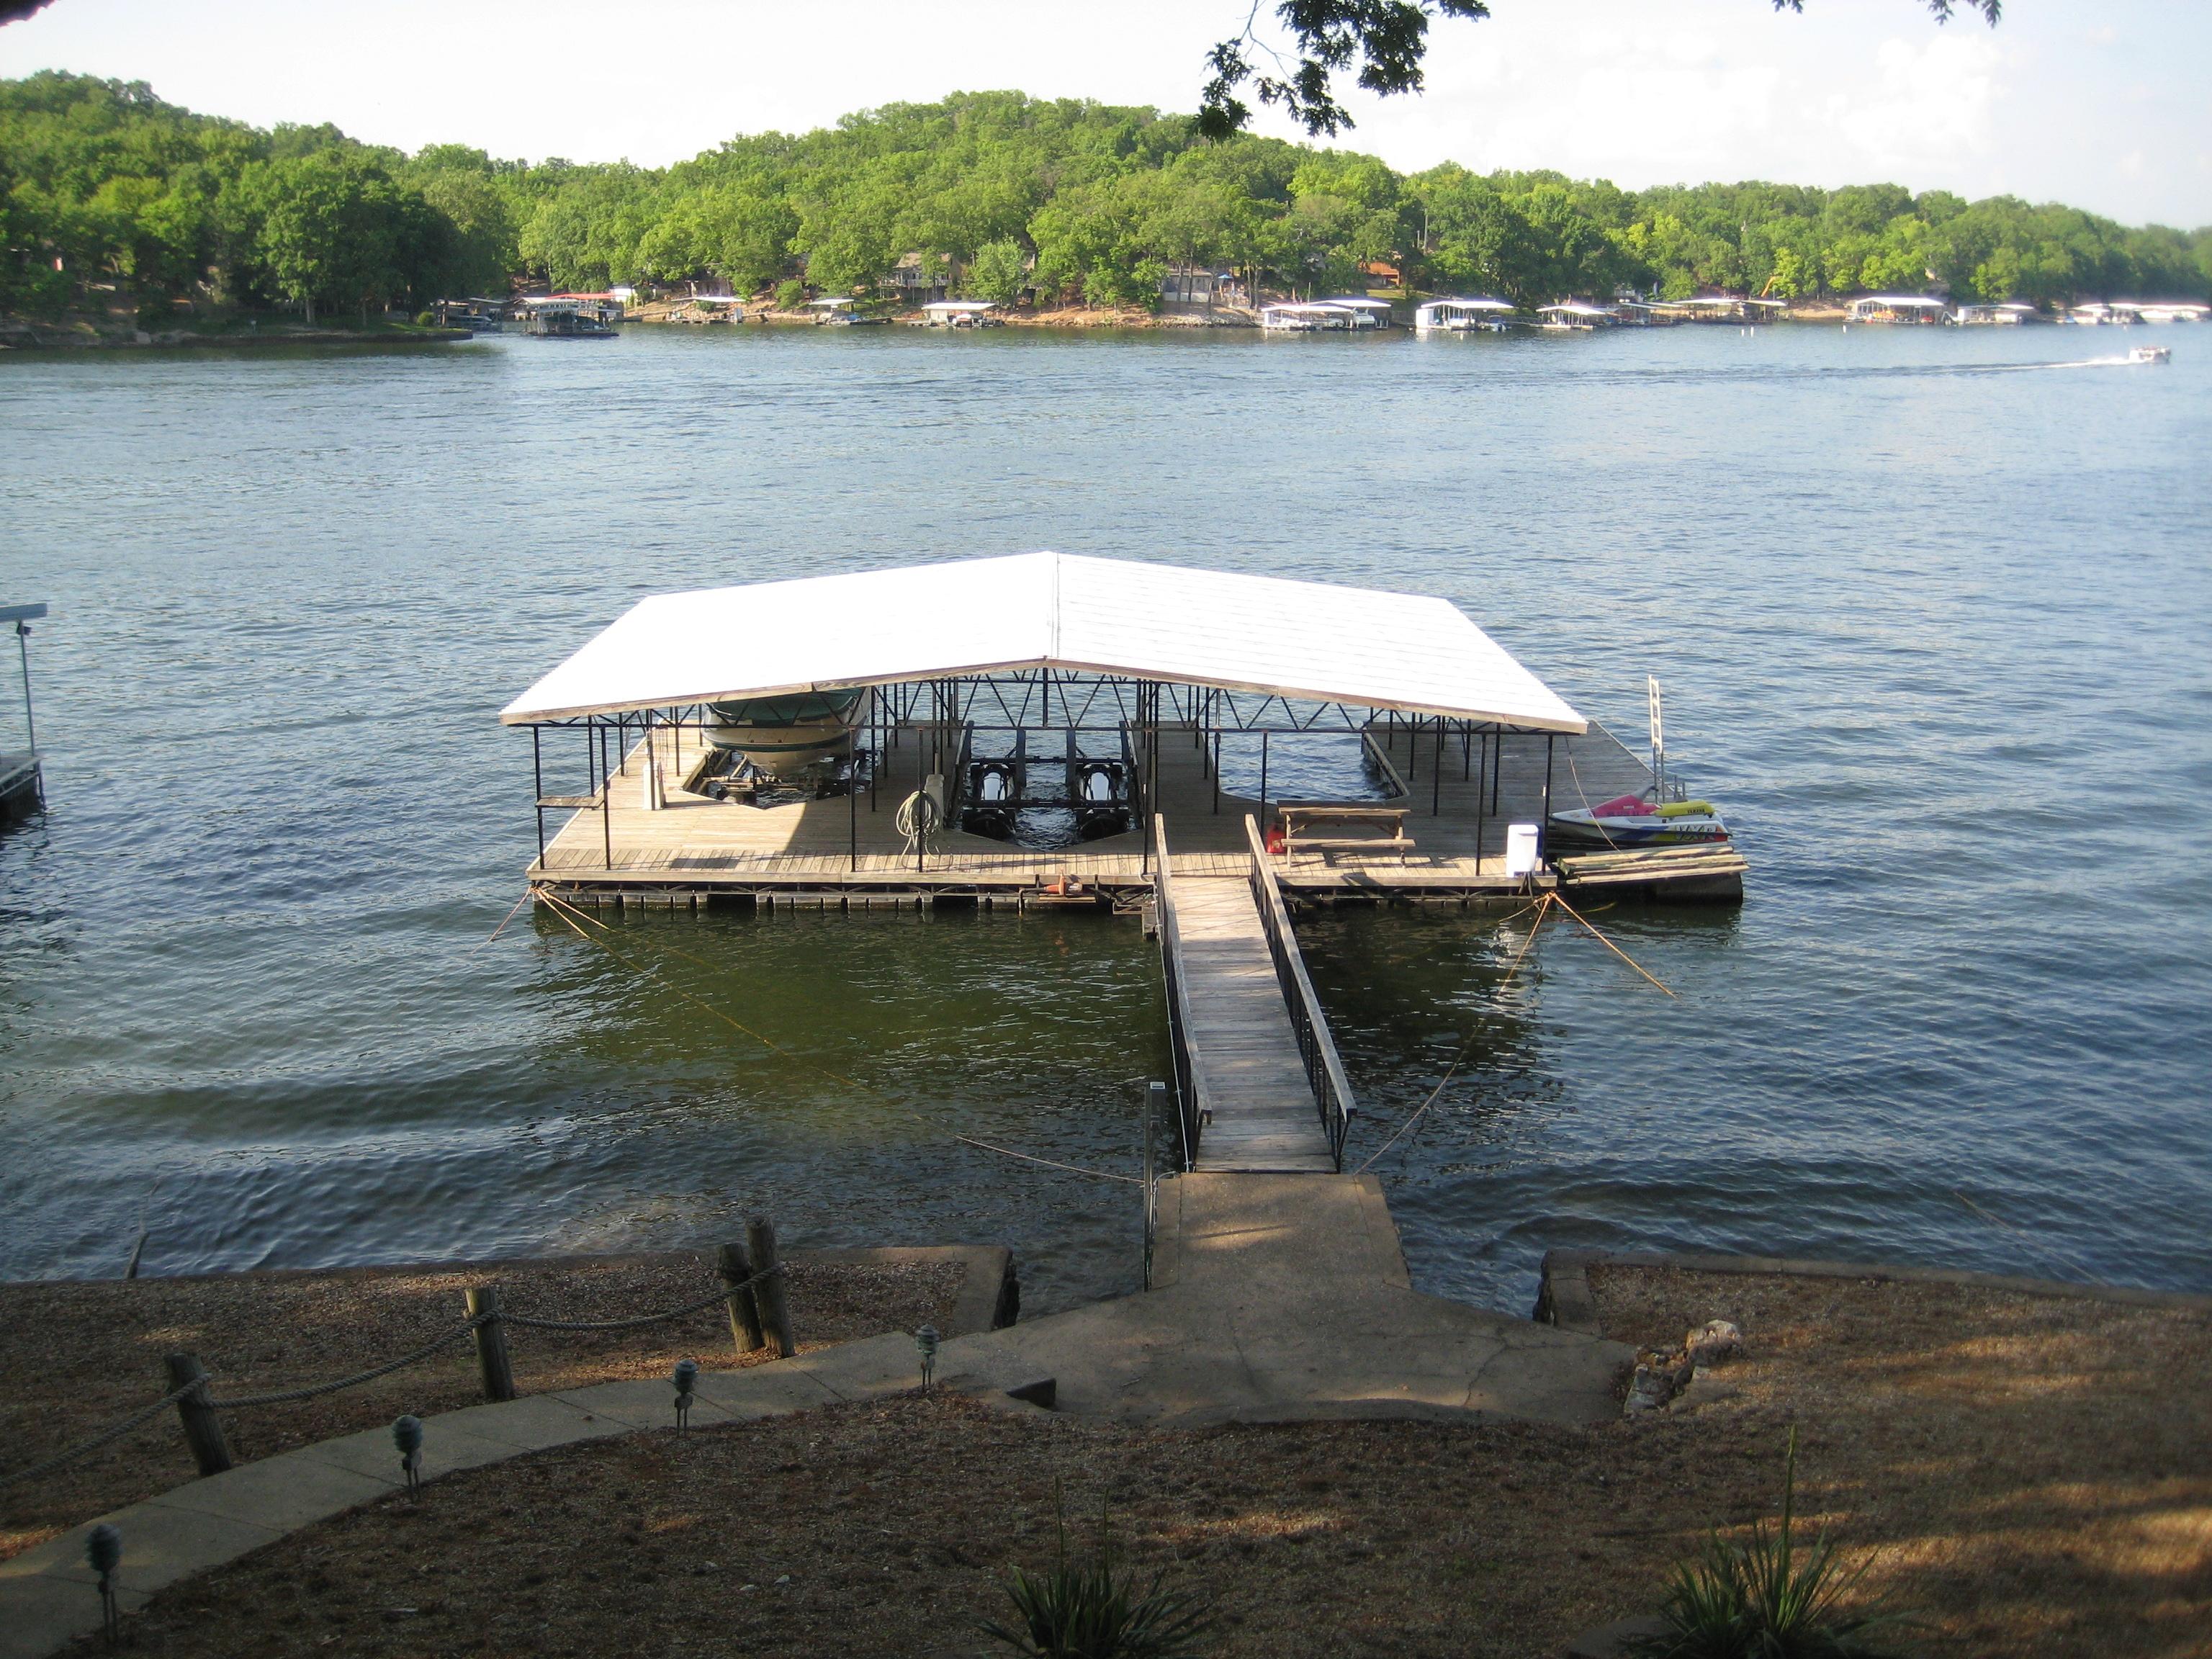 4 bedrooms, lots of room to vacation and really enjoy the Lake. Large dock to swim, boat, fish and just relax!